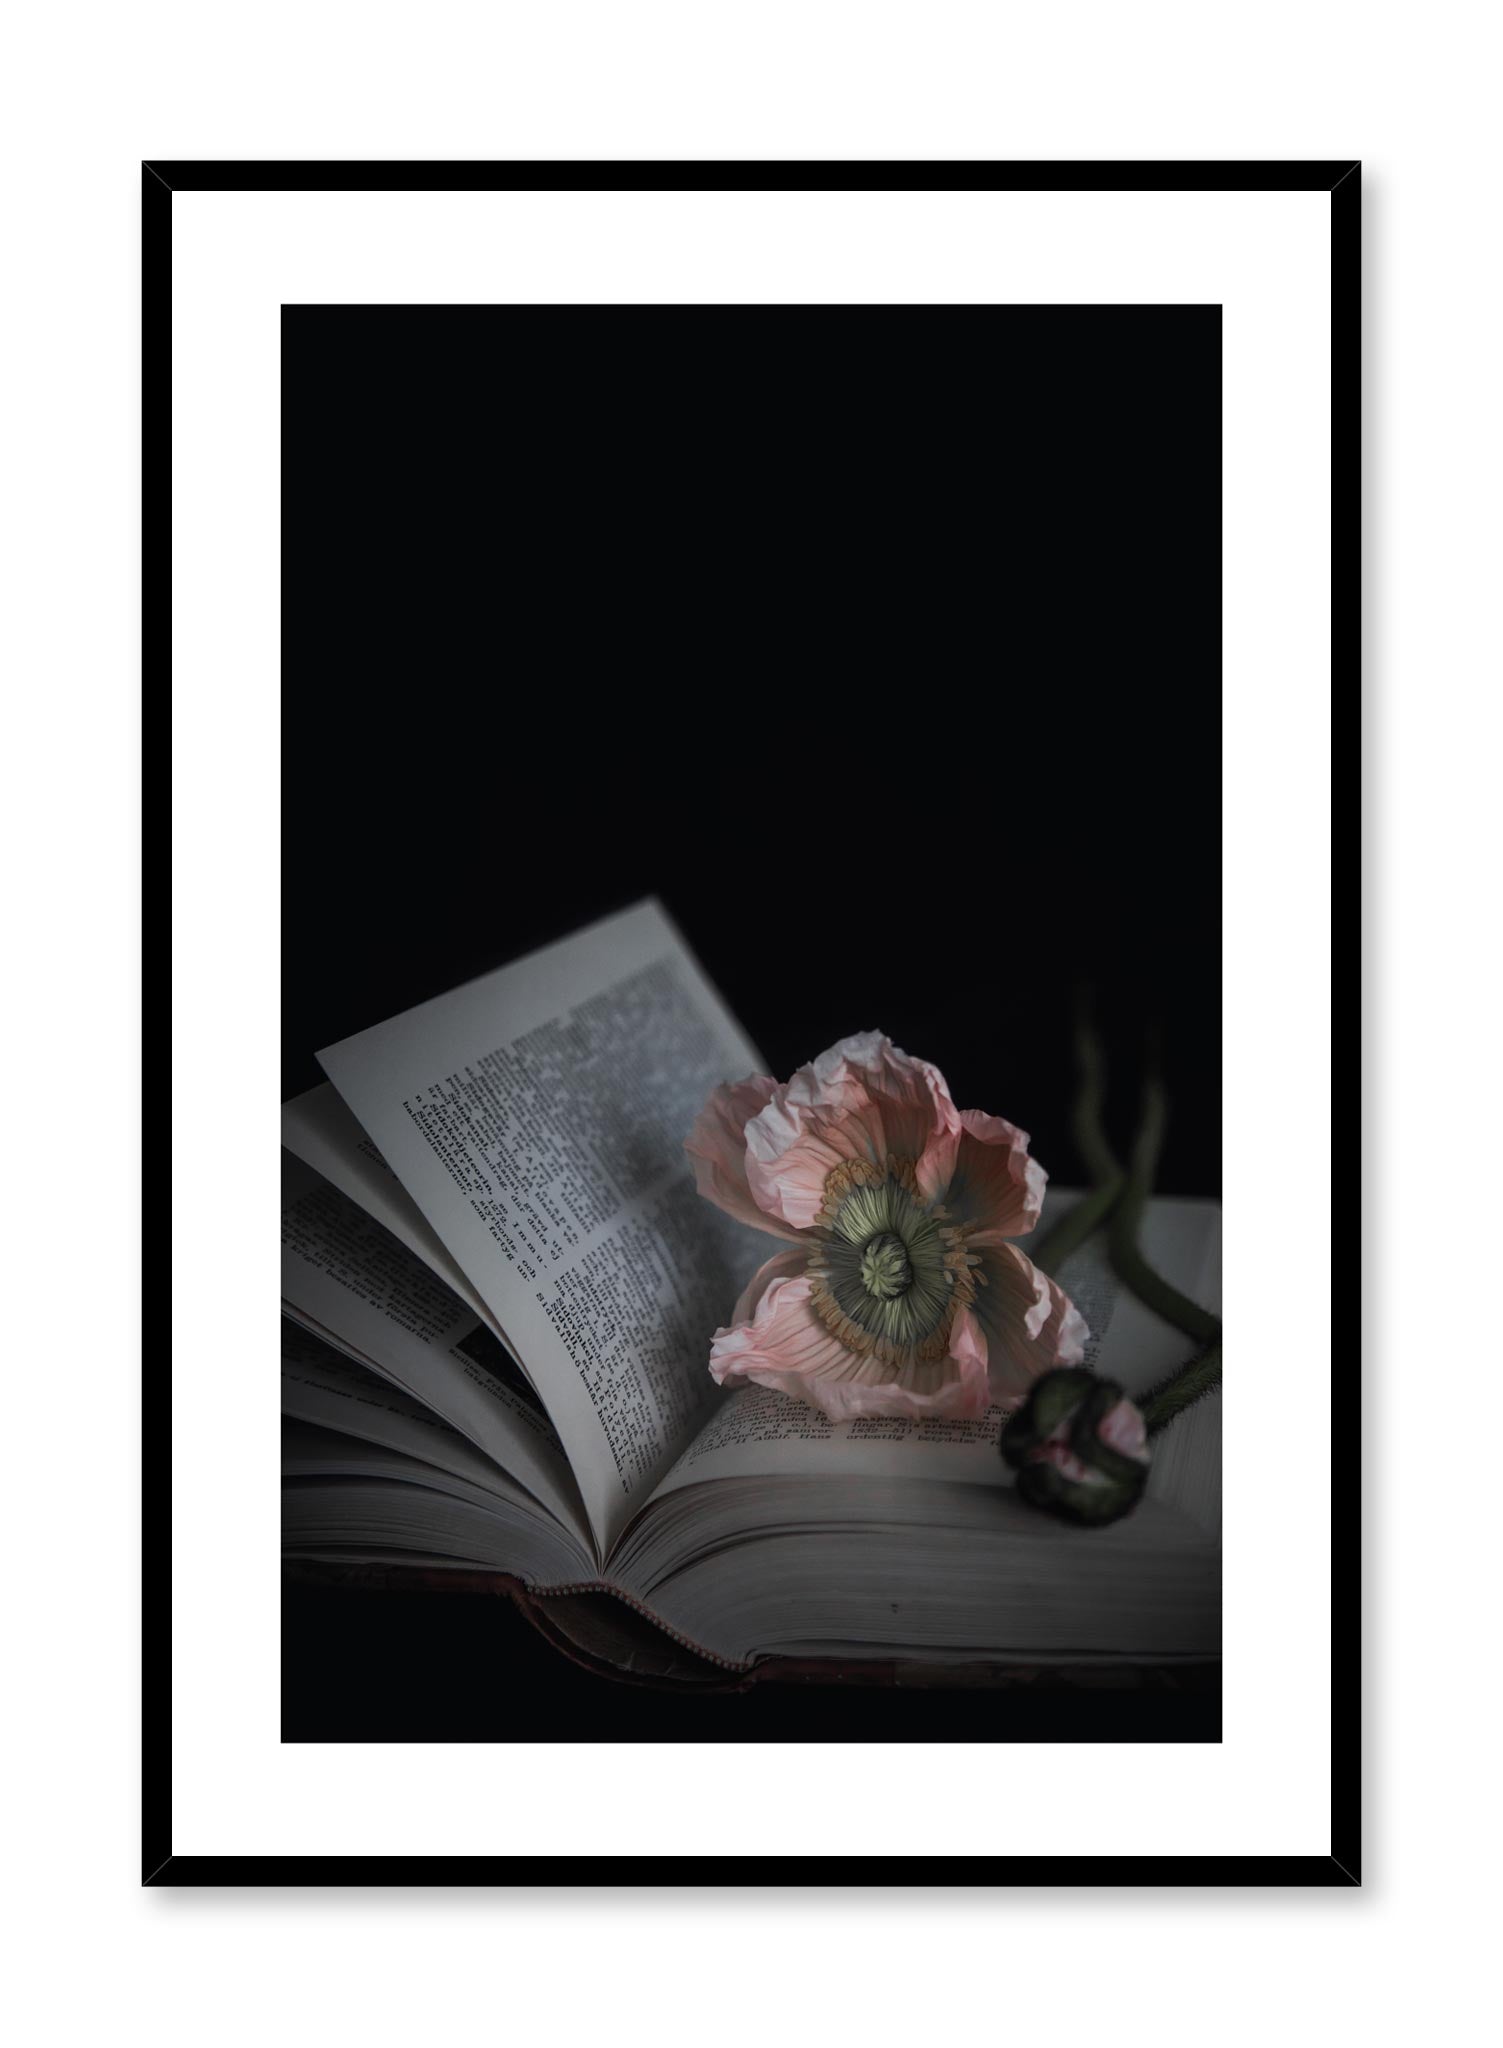 Minimalist design floral photography poster of Flowermark by Love Warriors Creative Studio - Buy at Opposite Wall